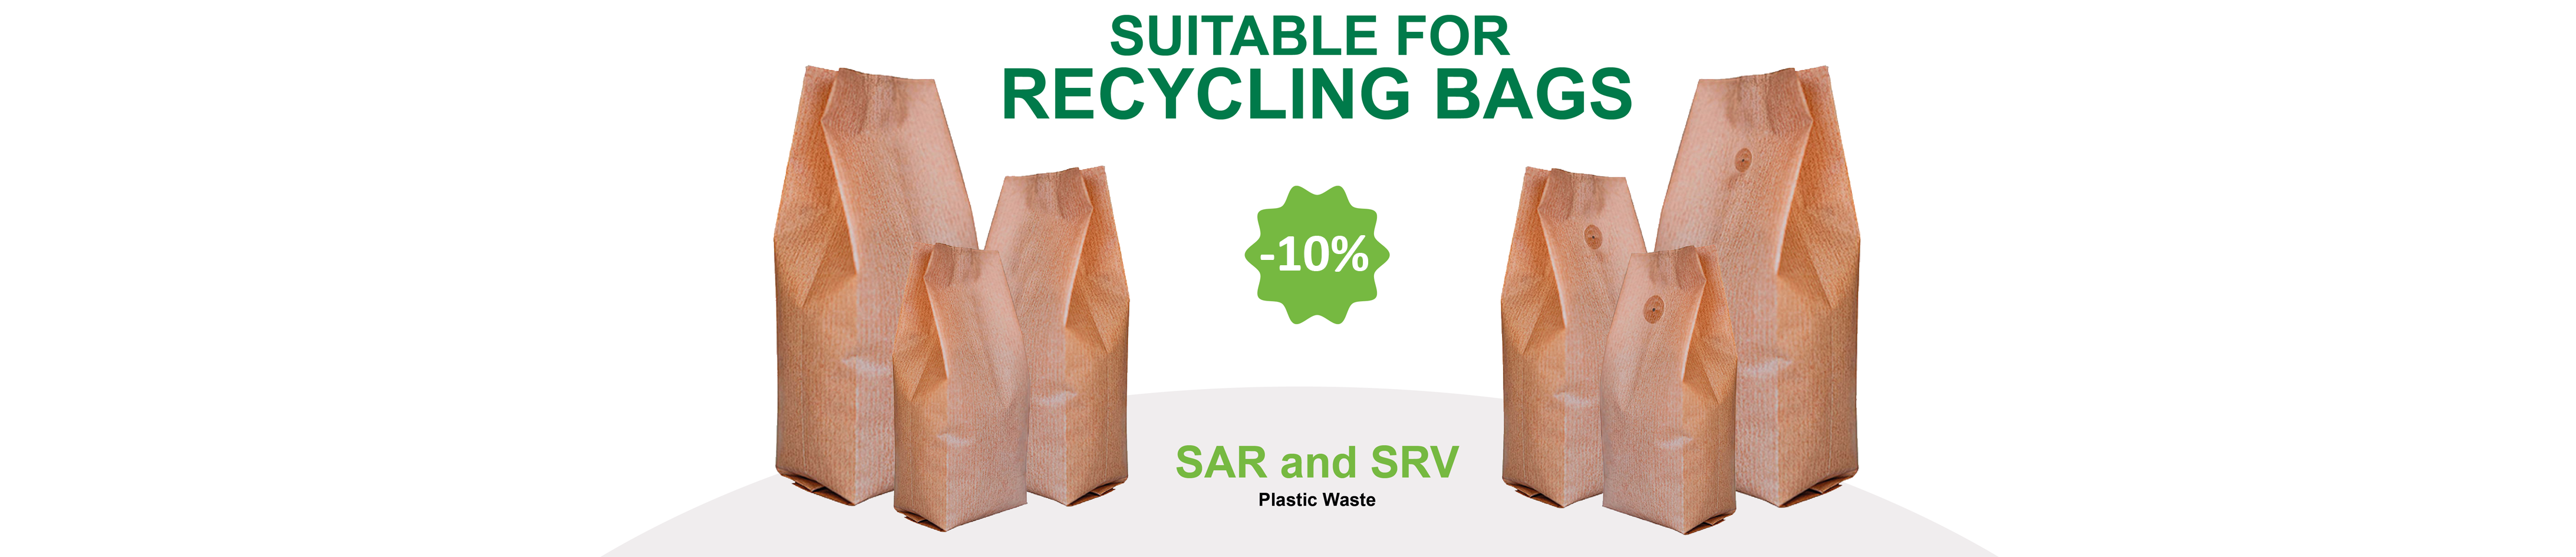 recyclable_bags_discount.png